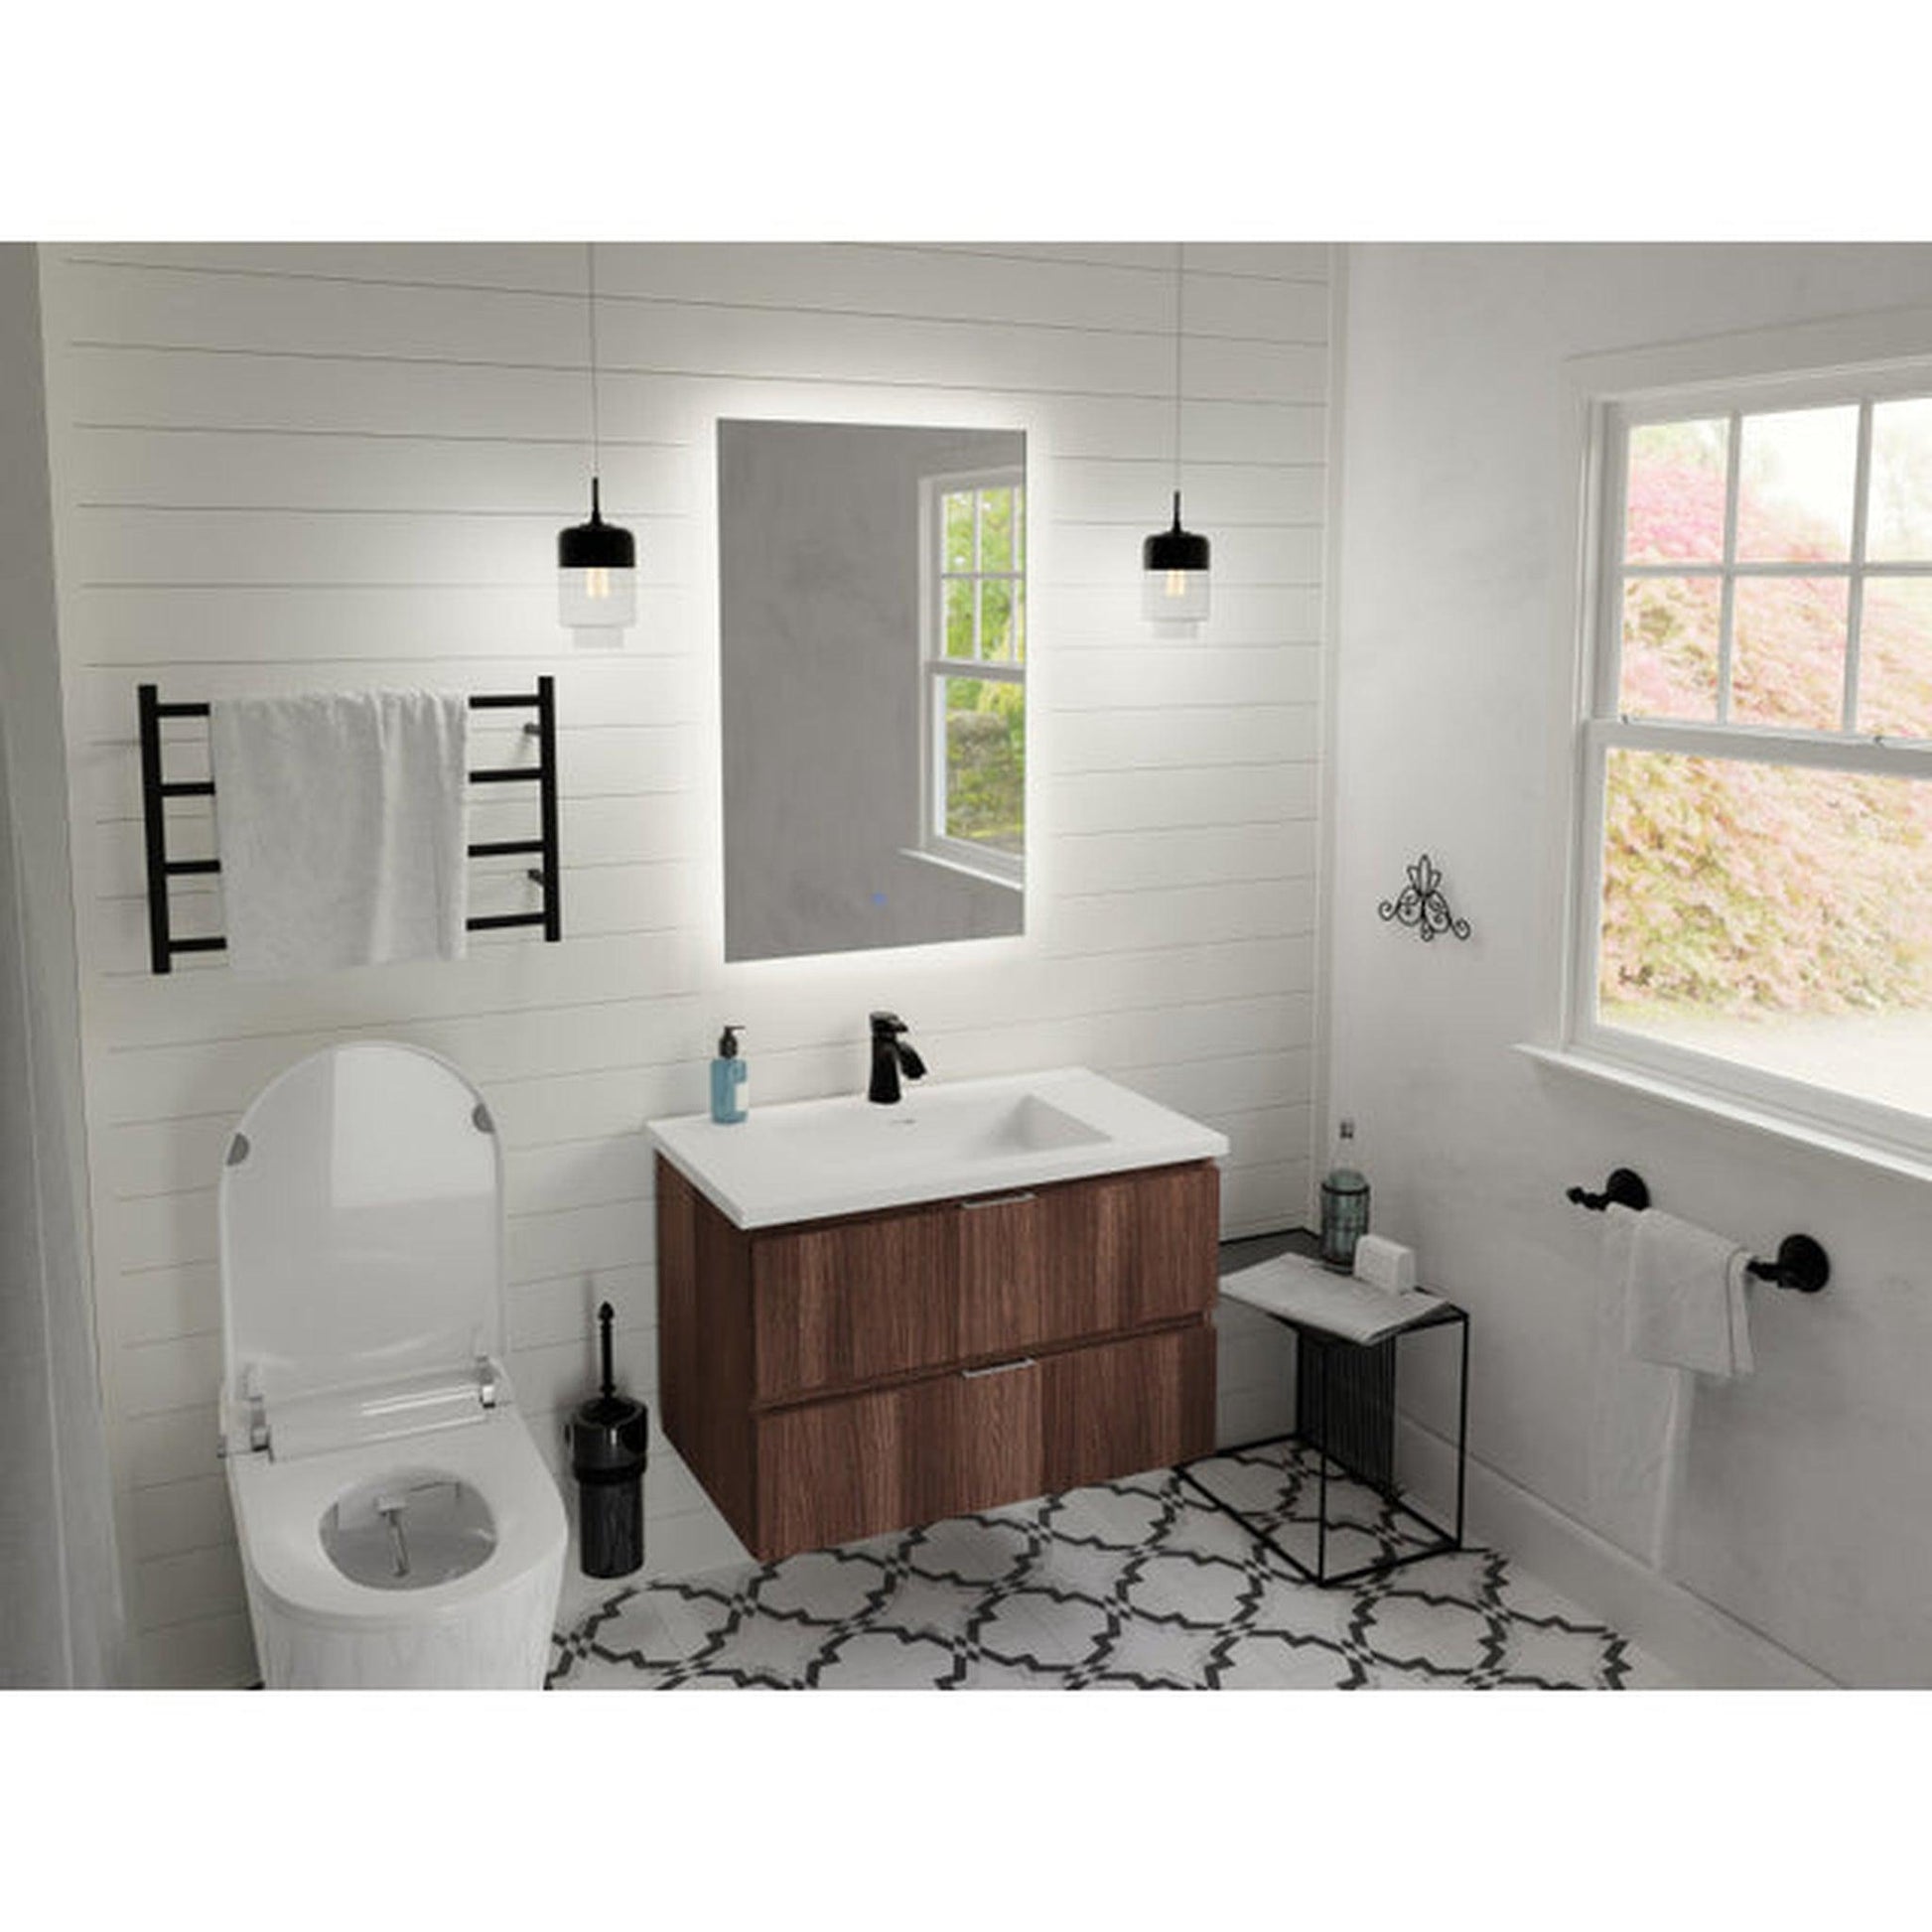 ANZZI Conques Series 30" x 20" Dark Brown Solid Wood Bathroom Vanity With Glossy White Sink and Countertop